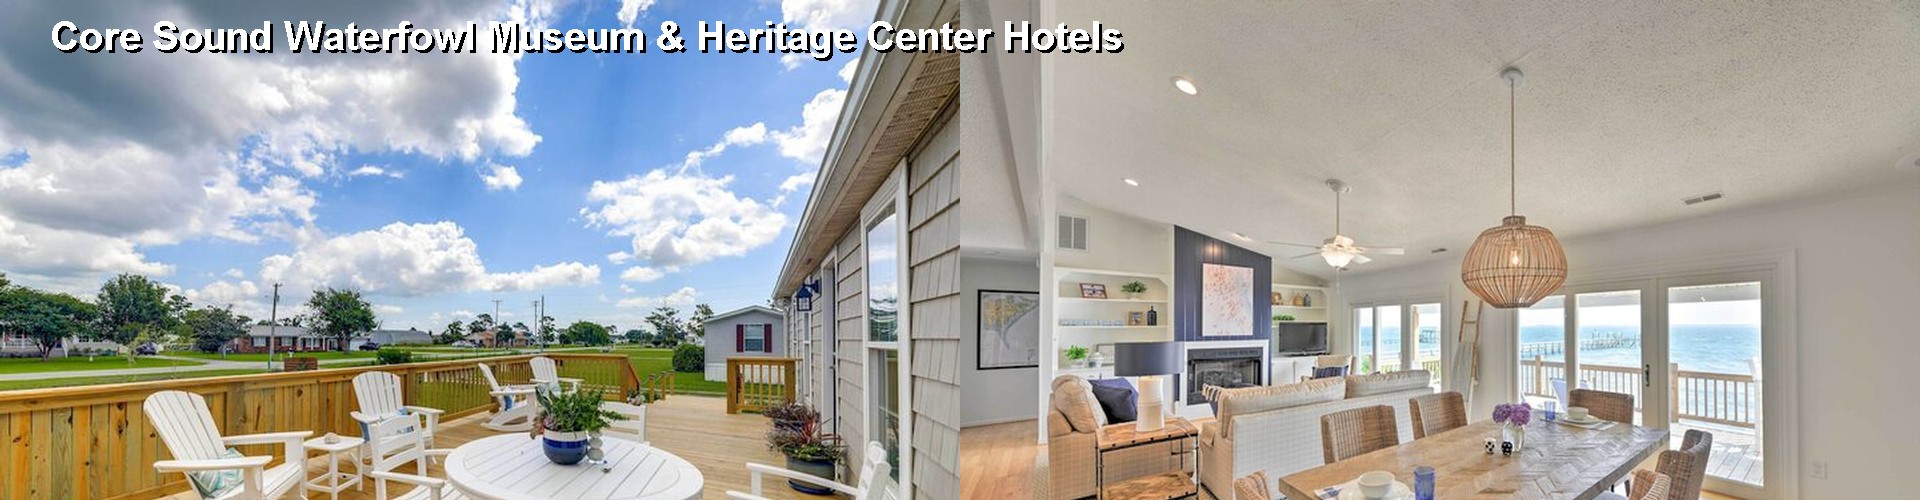 5 Best Hotels near Core Sound Waterfowl Museum & Heritage Center